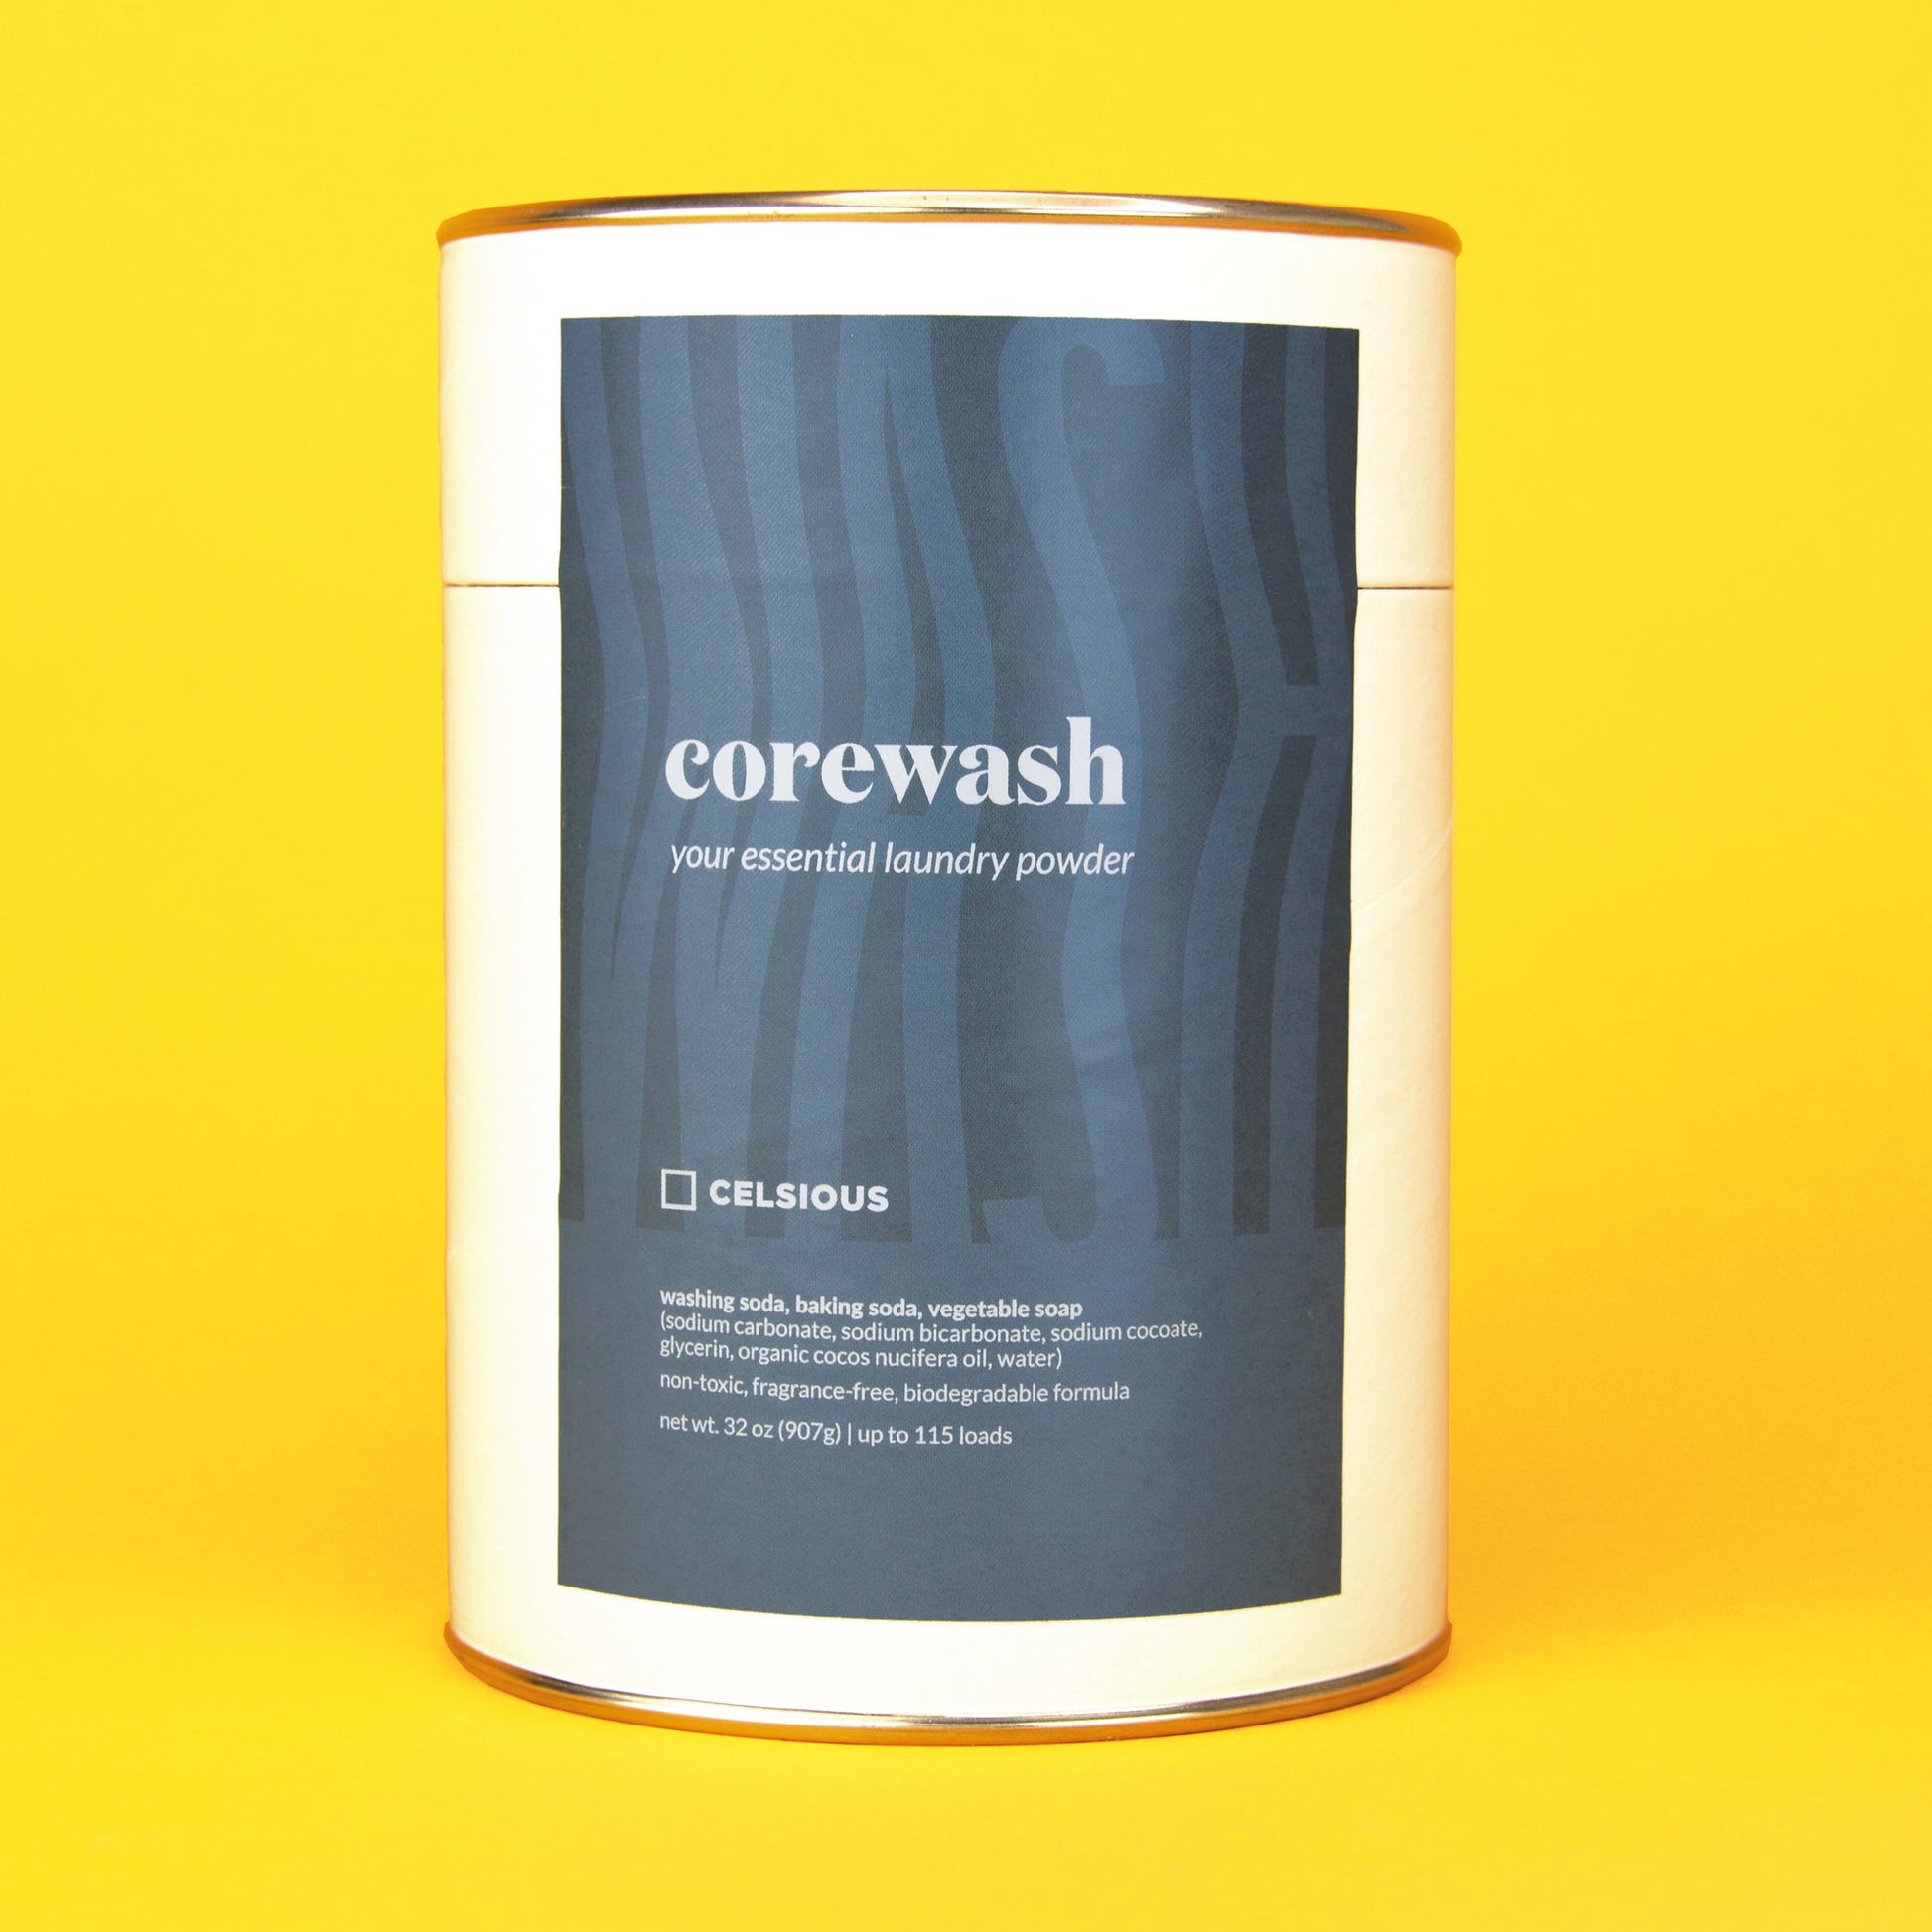 A white can of unscented laundry powder by Celsious with a blue label that reads "corewash" followed by ingredient info; the can is displayed on a yellow background